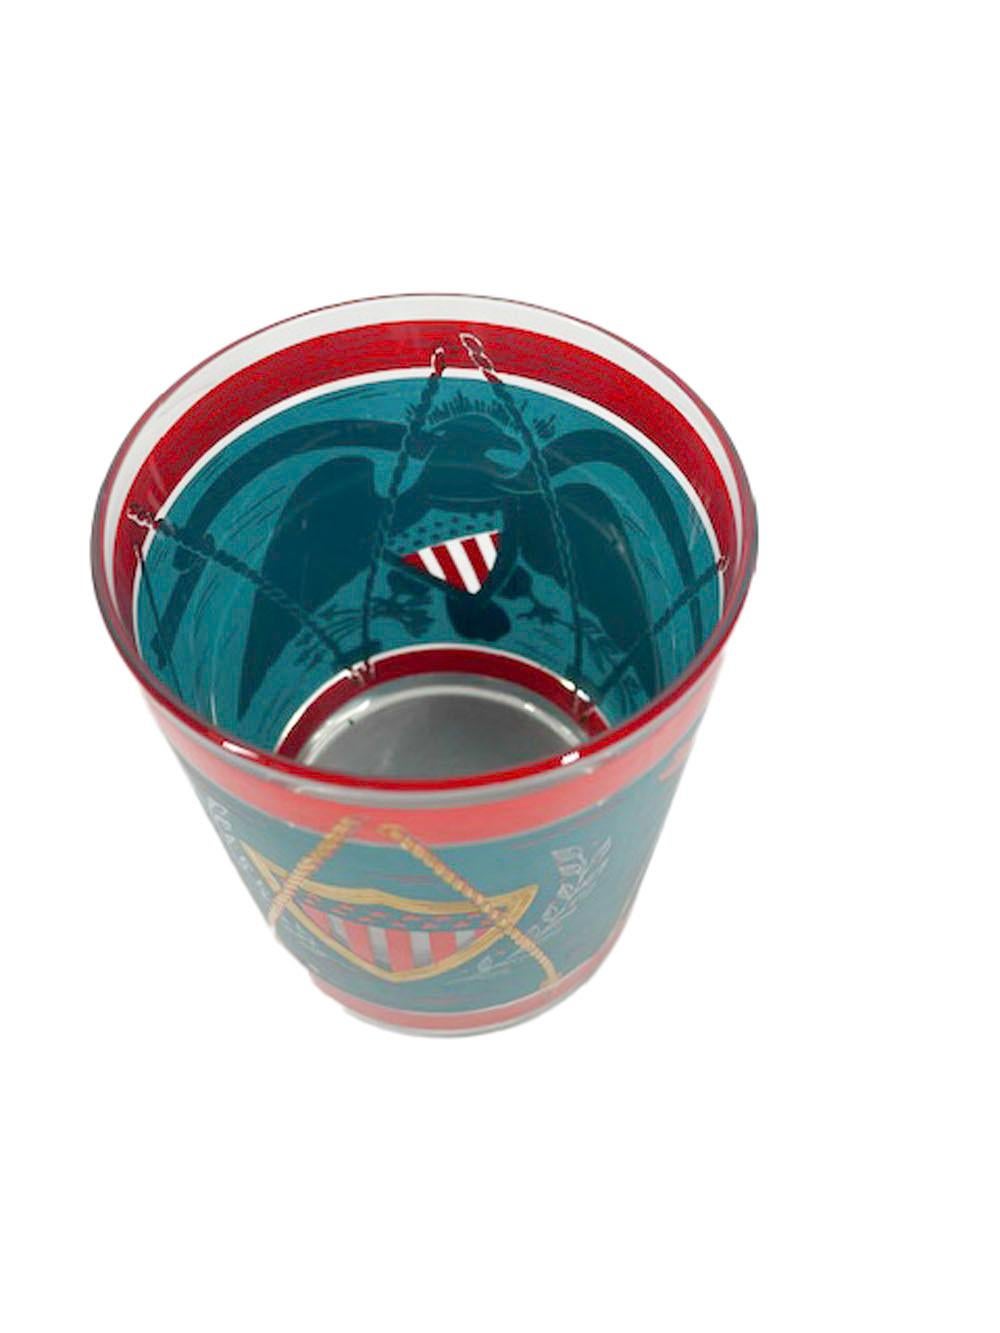 20th Century Vintage Cera Glassware Rocks Glasses in Teal and Red Drum Pattern w/Gold Eagle